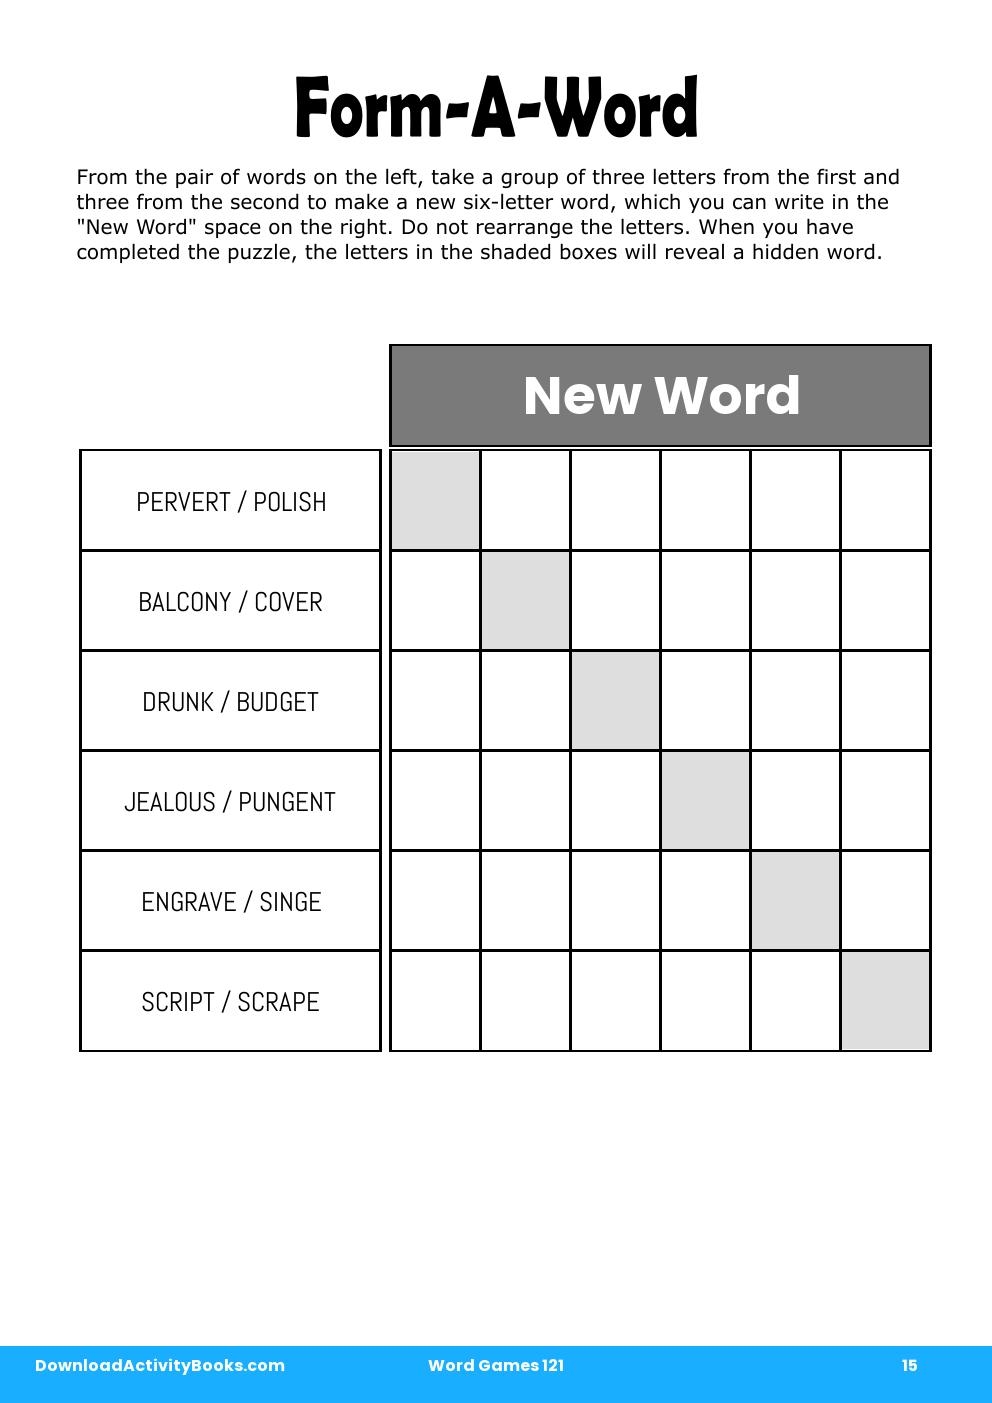 Form-A-Word in Word Games 121